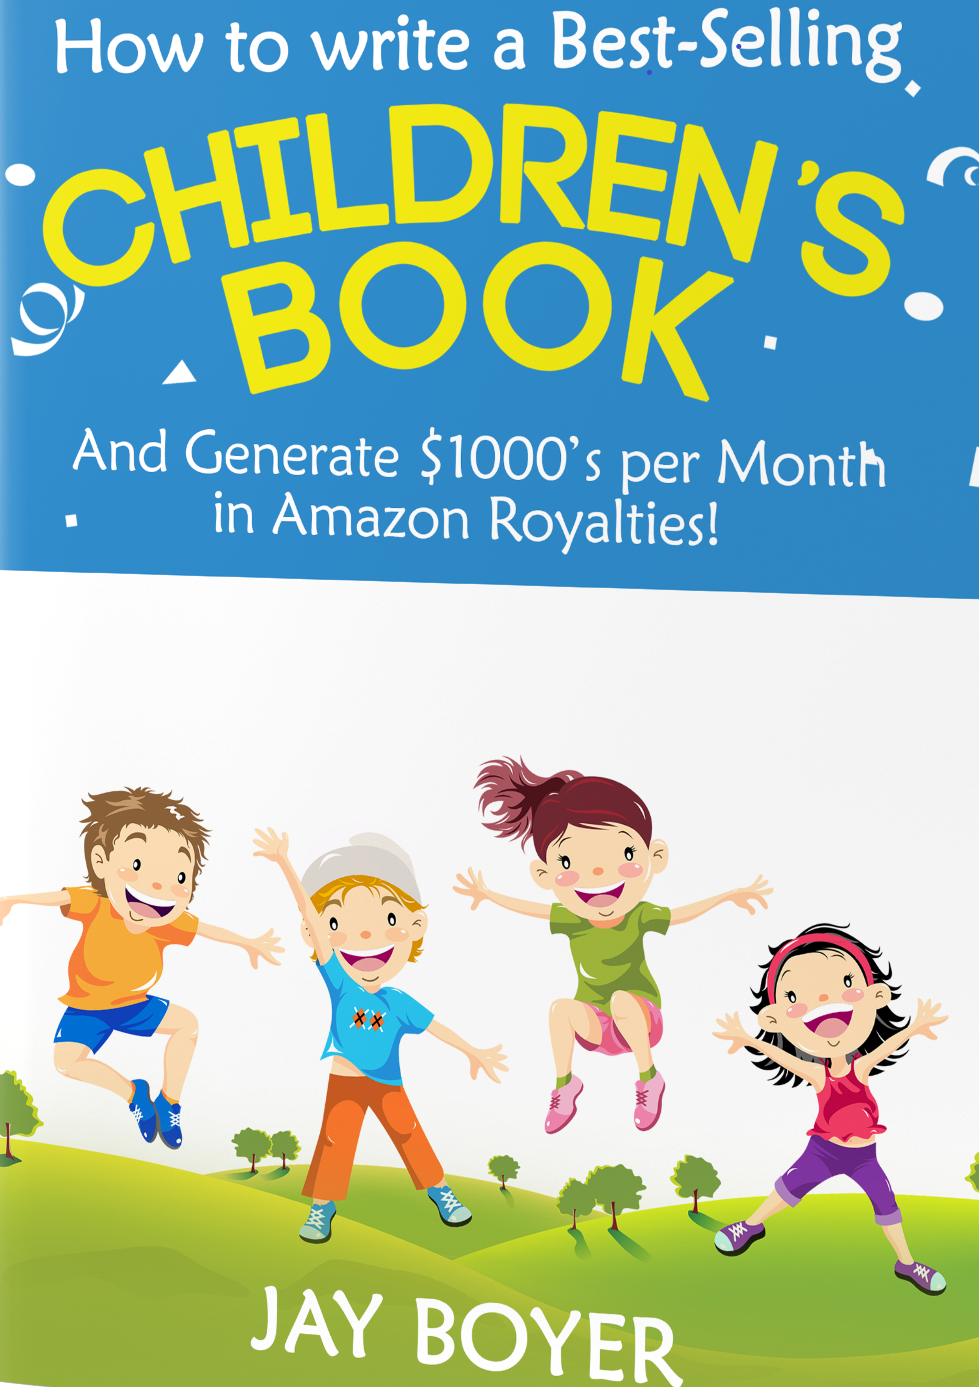 Baby Book Guide: Use Amazon KDP Publishing Tips To Write A Children’s Bestseller